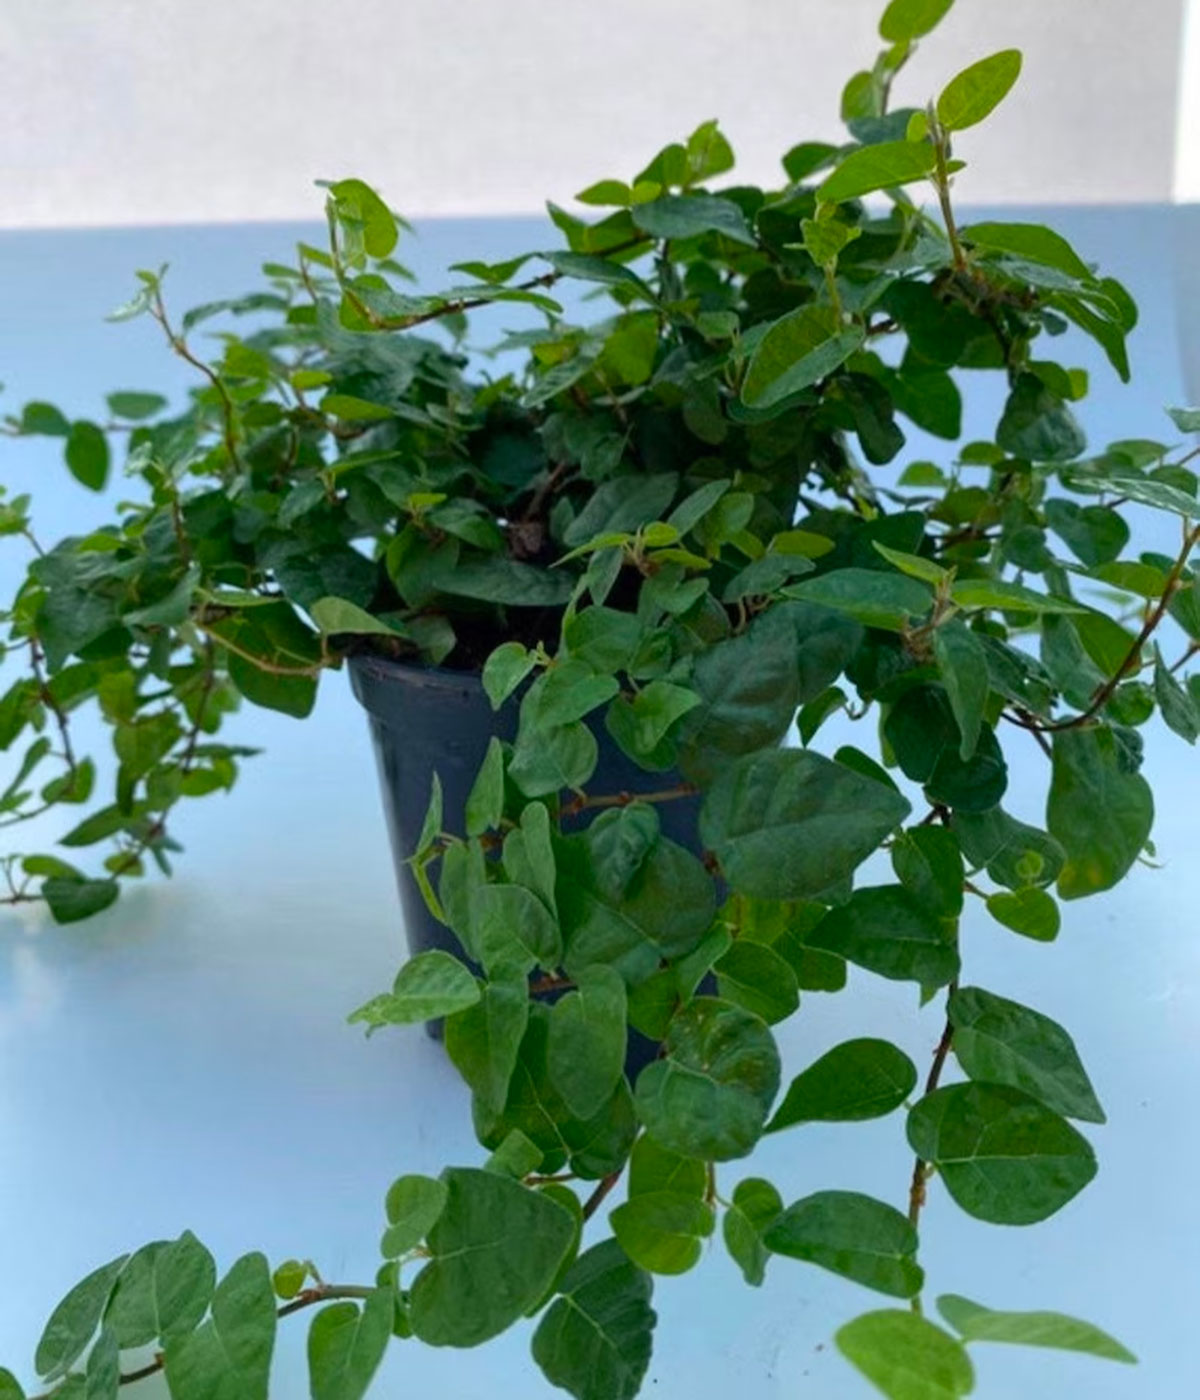 A potted creeping fig plant for terrariums on a counter.